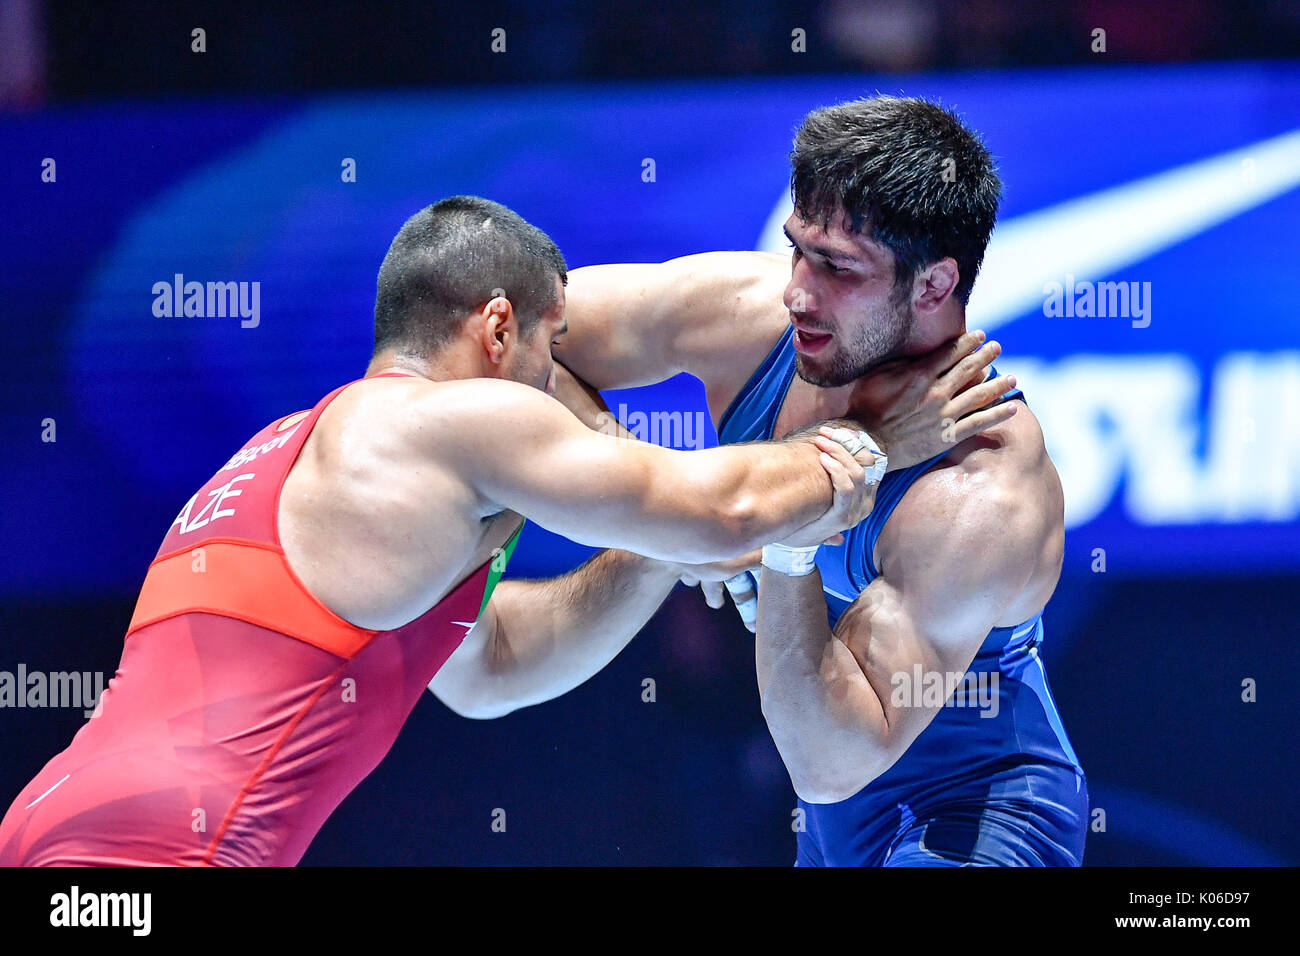 Paris. 21st Aug, 2017. Hossein Ahmad Nouri of Iran (R) competes with Islam  Abbasov of Azerbaijan during the bronze medal match of men's 85kg  Greece-Roman wrestling of the FILA World Wrestling Championships